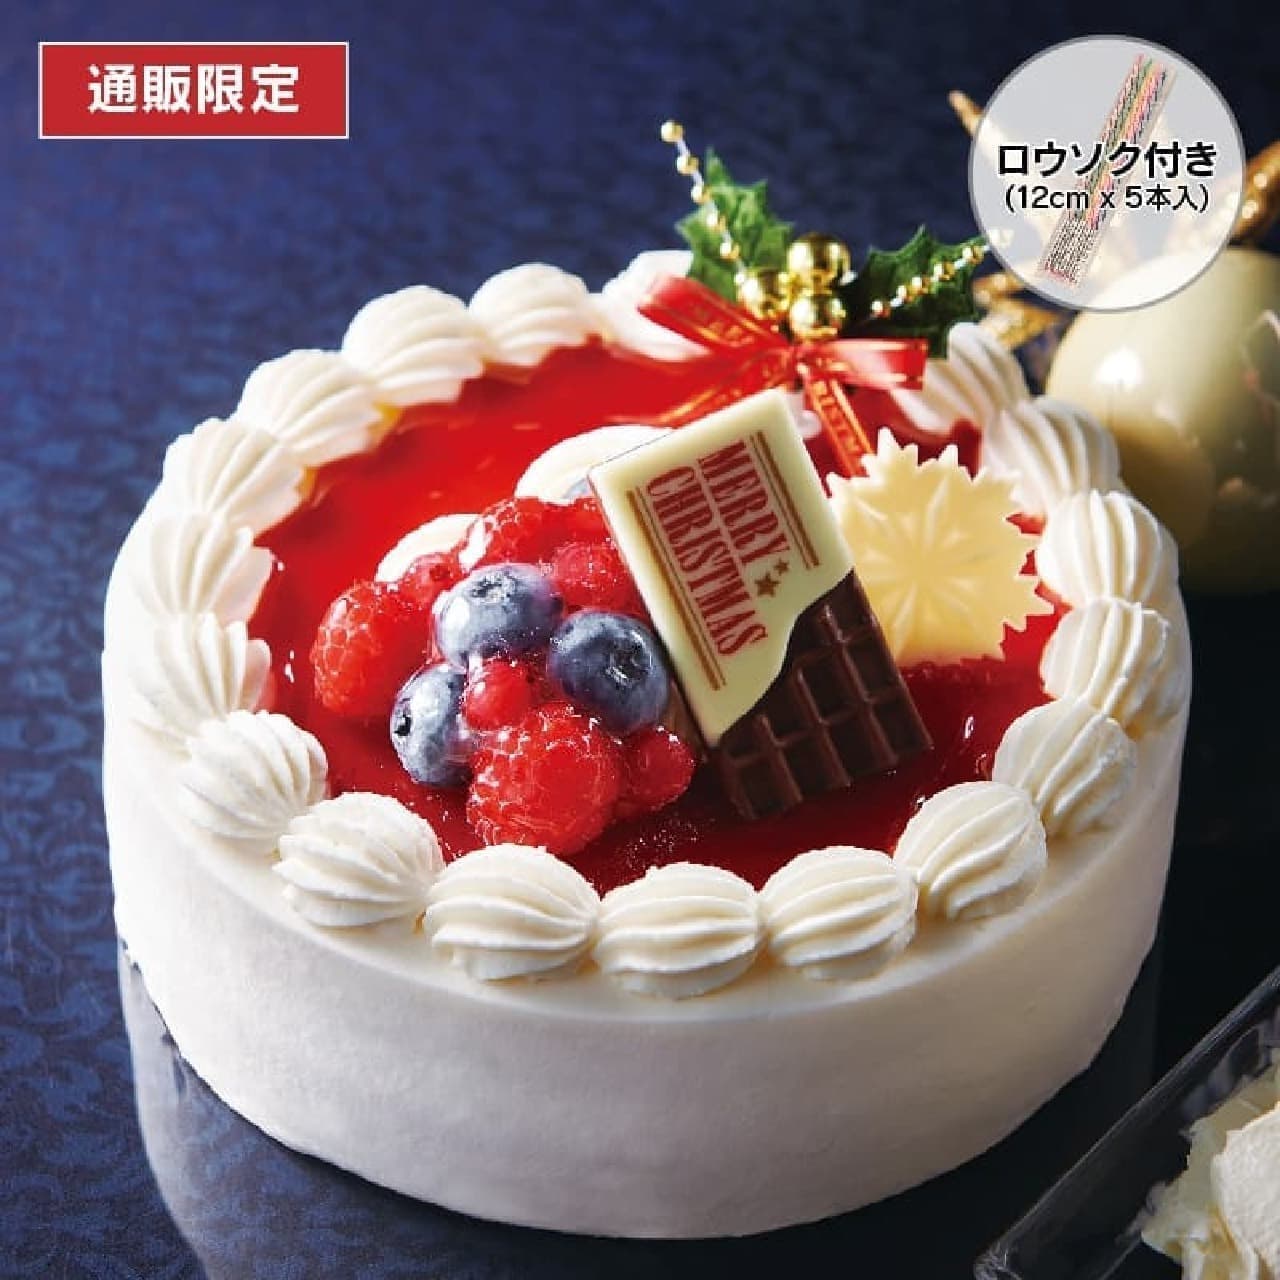 Chateraise "[Mail Order] Xmas 4 Kinds of Berry Soufflé Cheese Decoration 17cm Using French Cream Cheese".